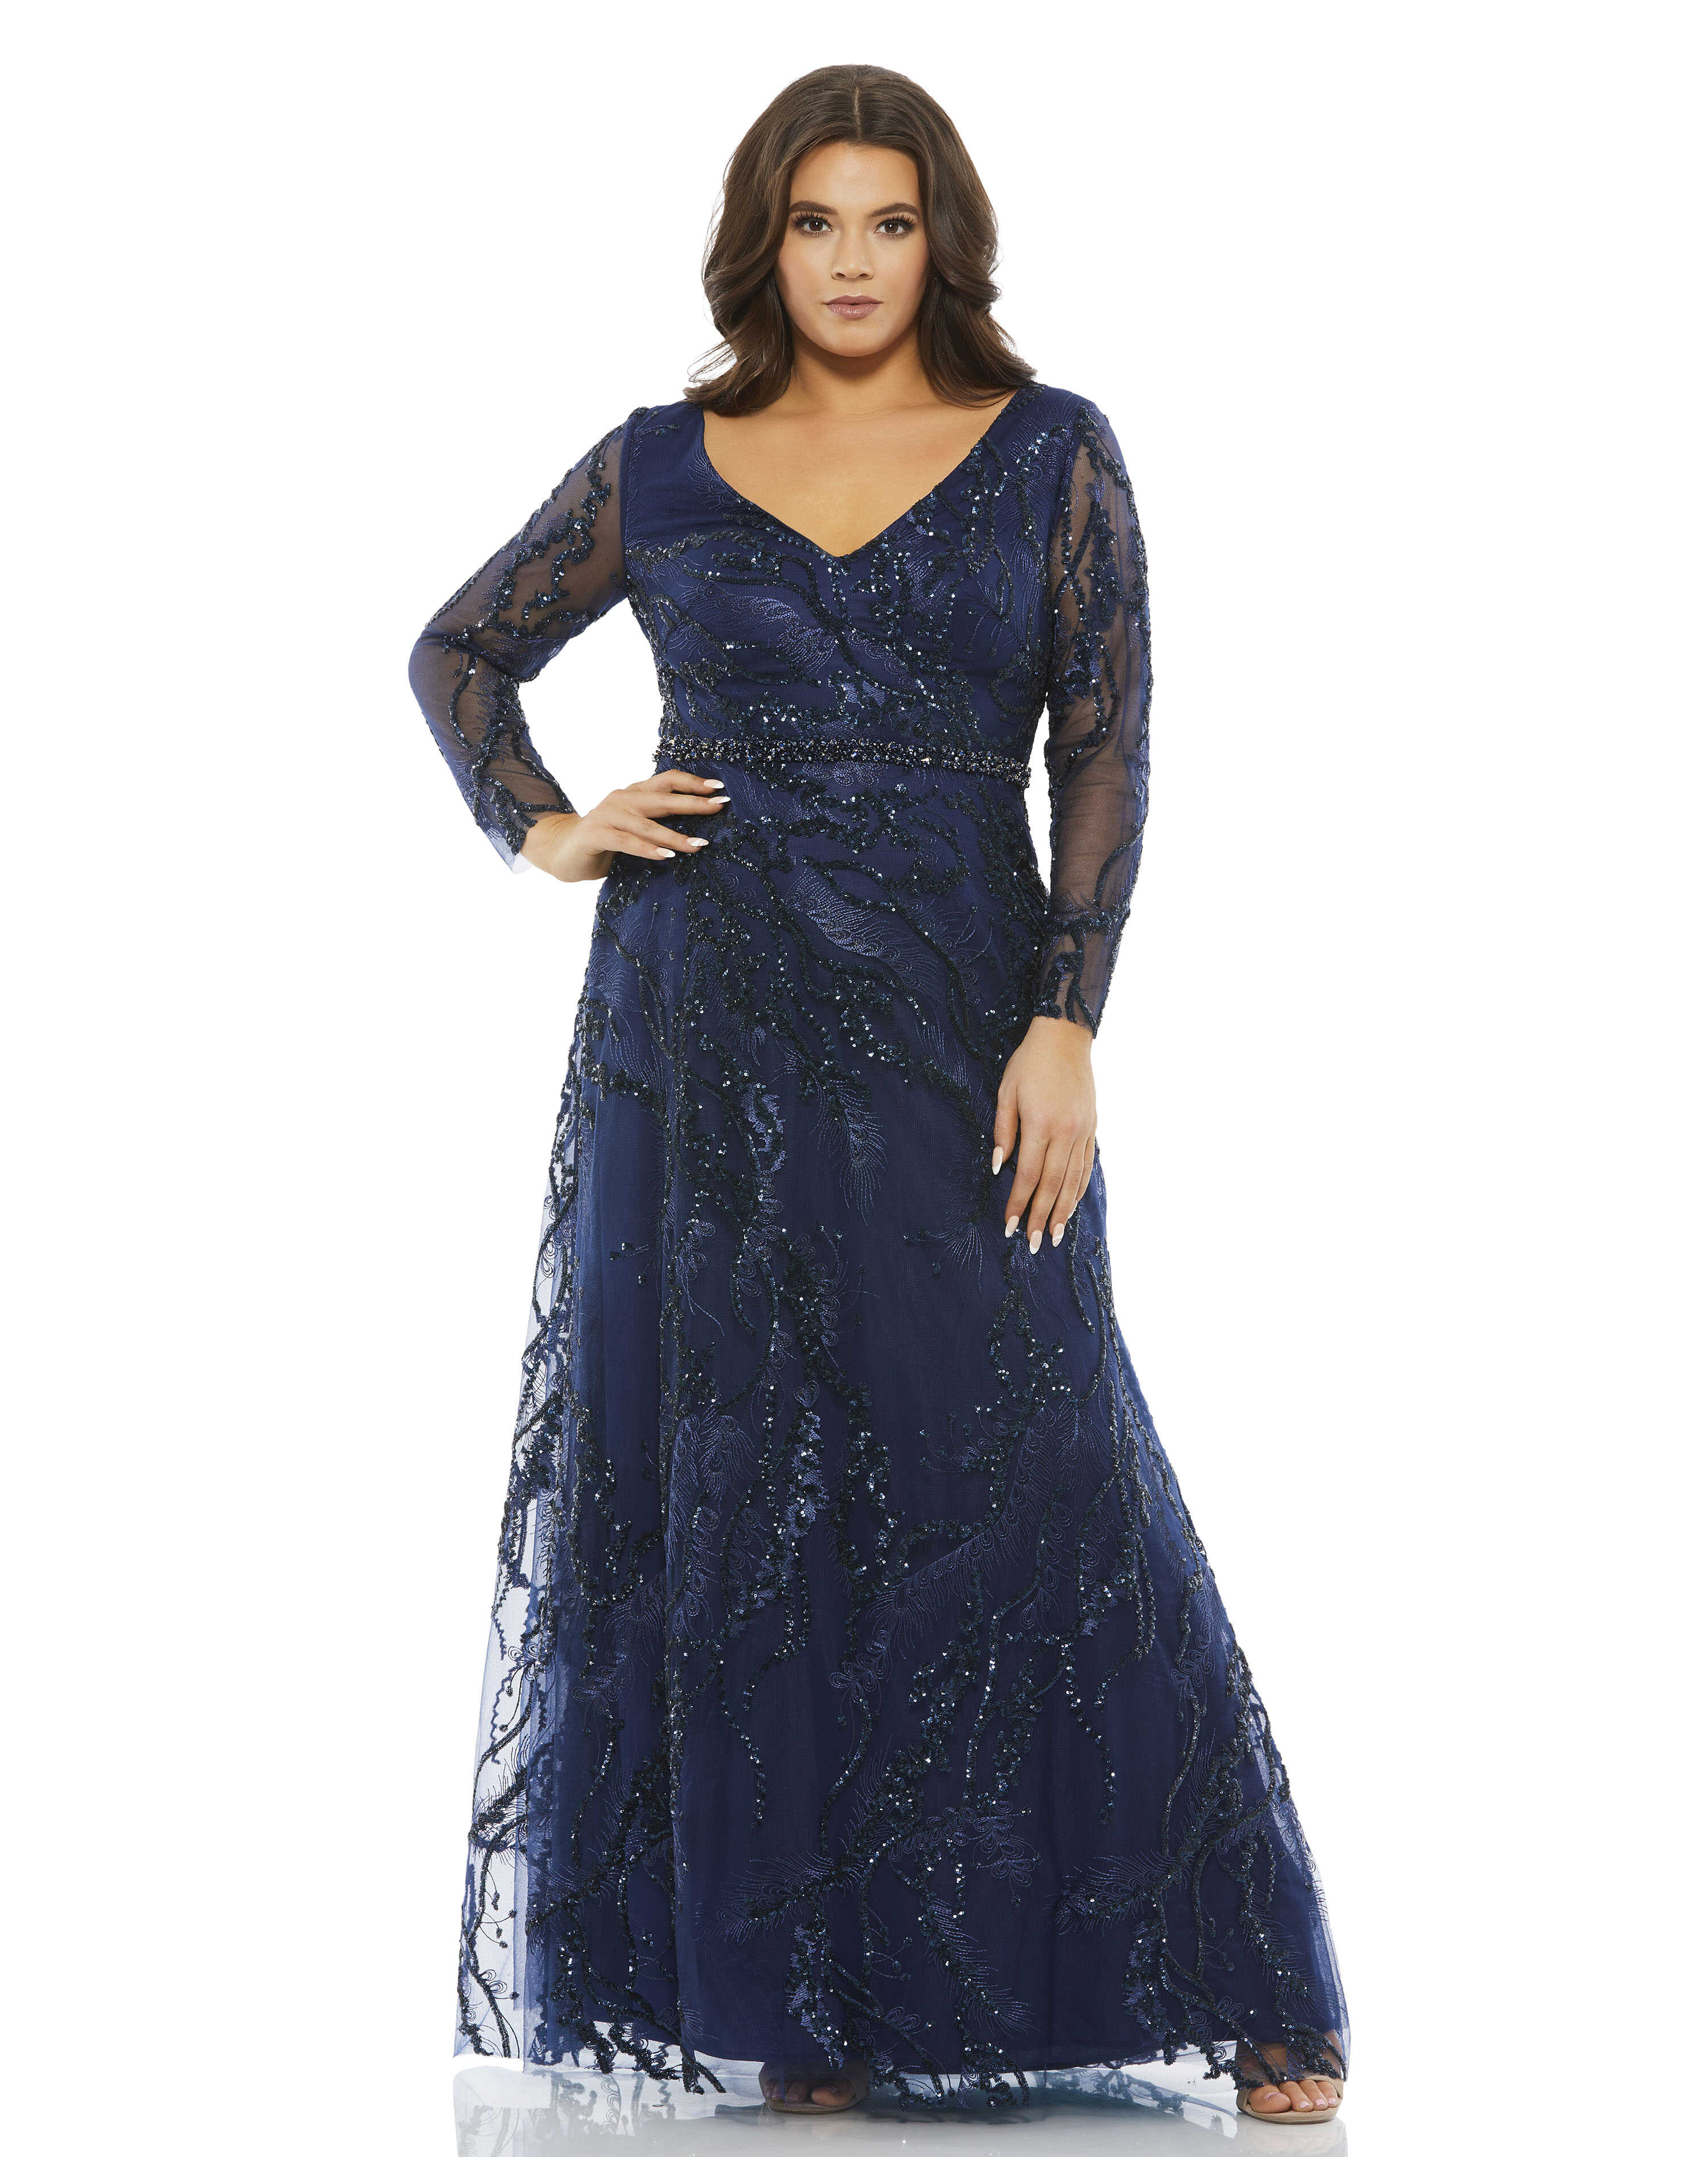 Embellished Illusion Long Sleeve V-Neck A-Line Gown (Plus)